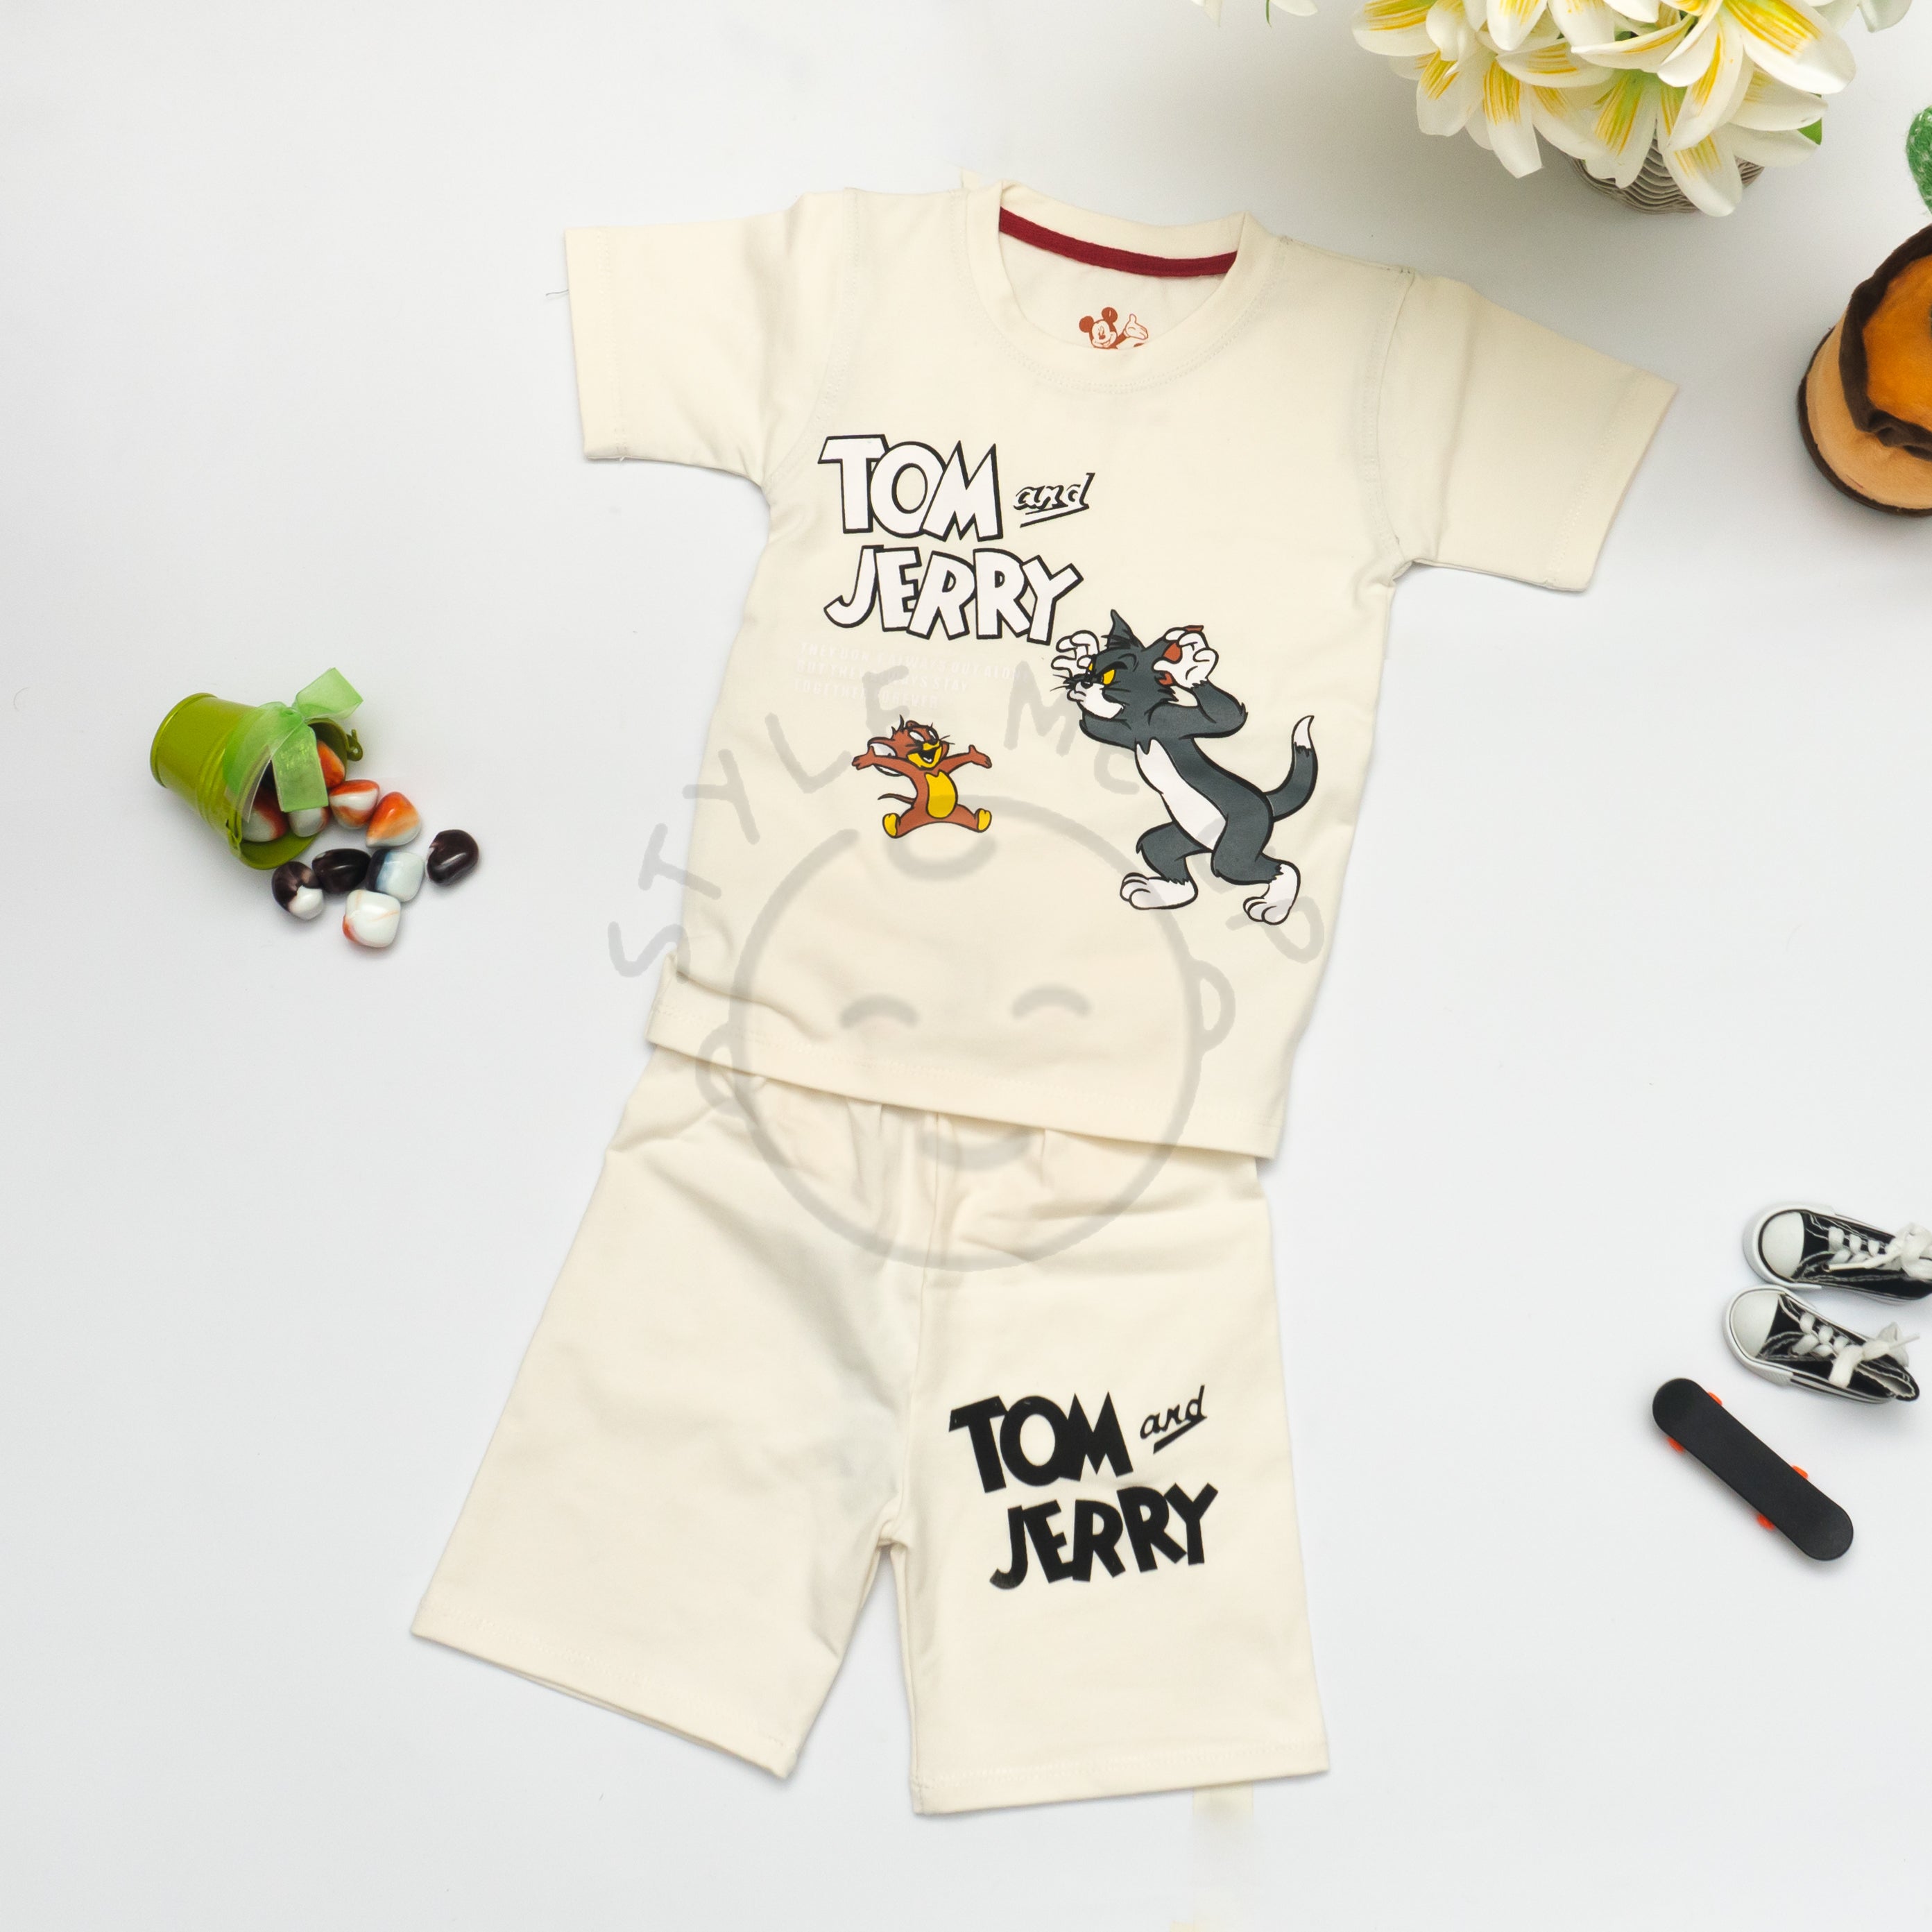 Tom and Jerry Half Sleeves T-shirt and Shorts for Kids - White